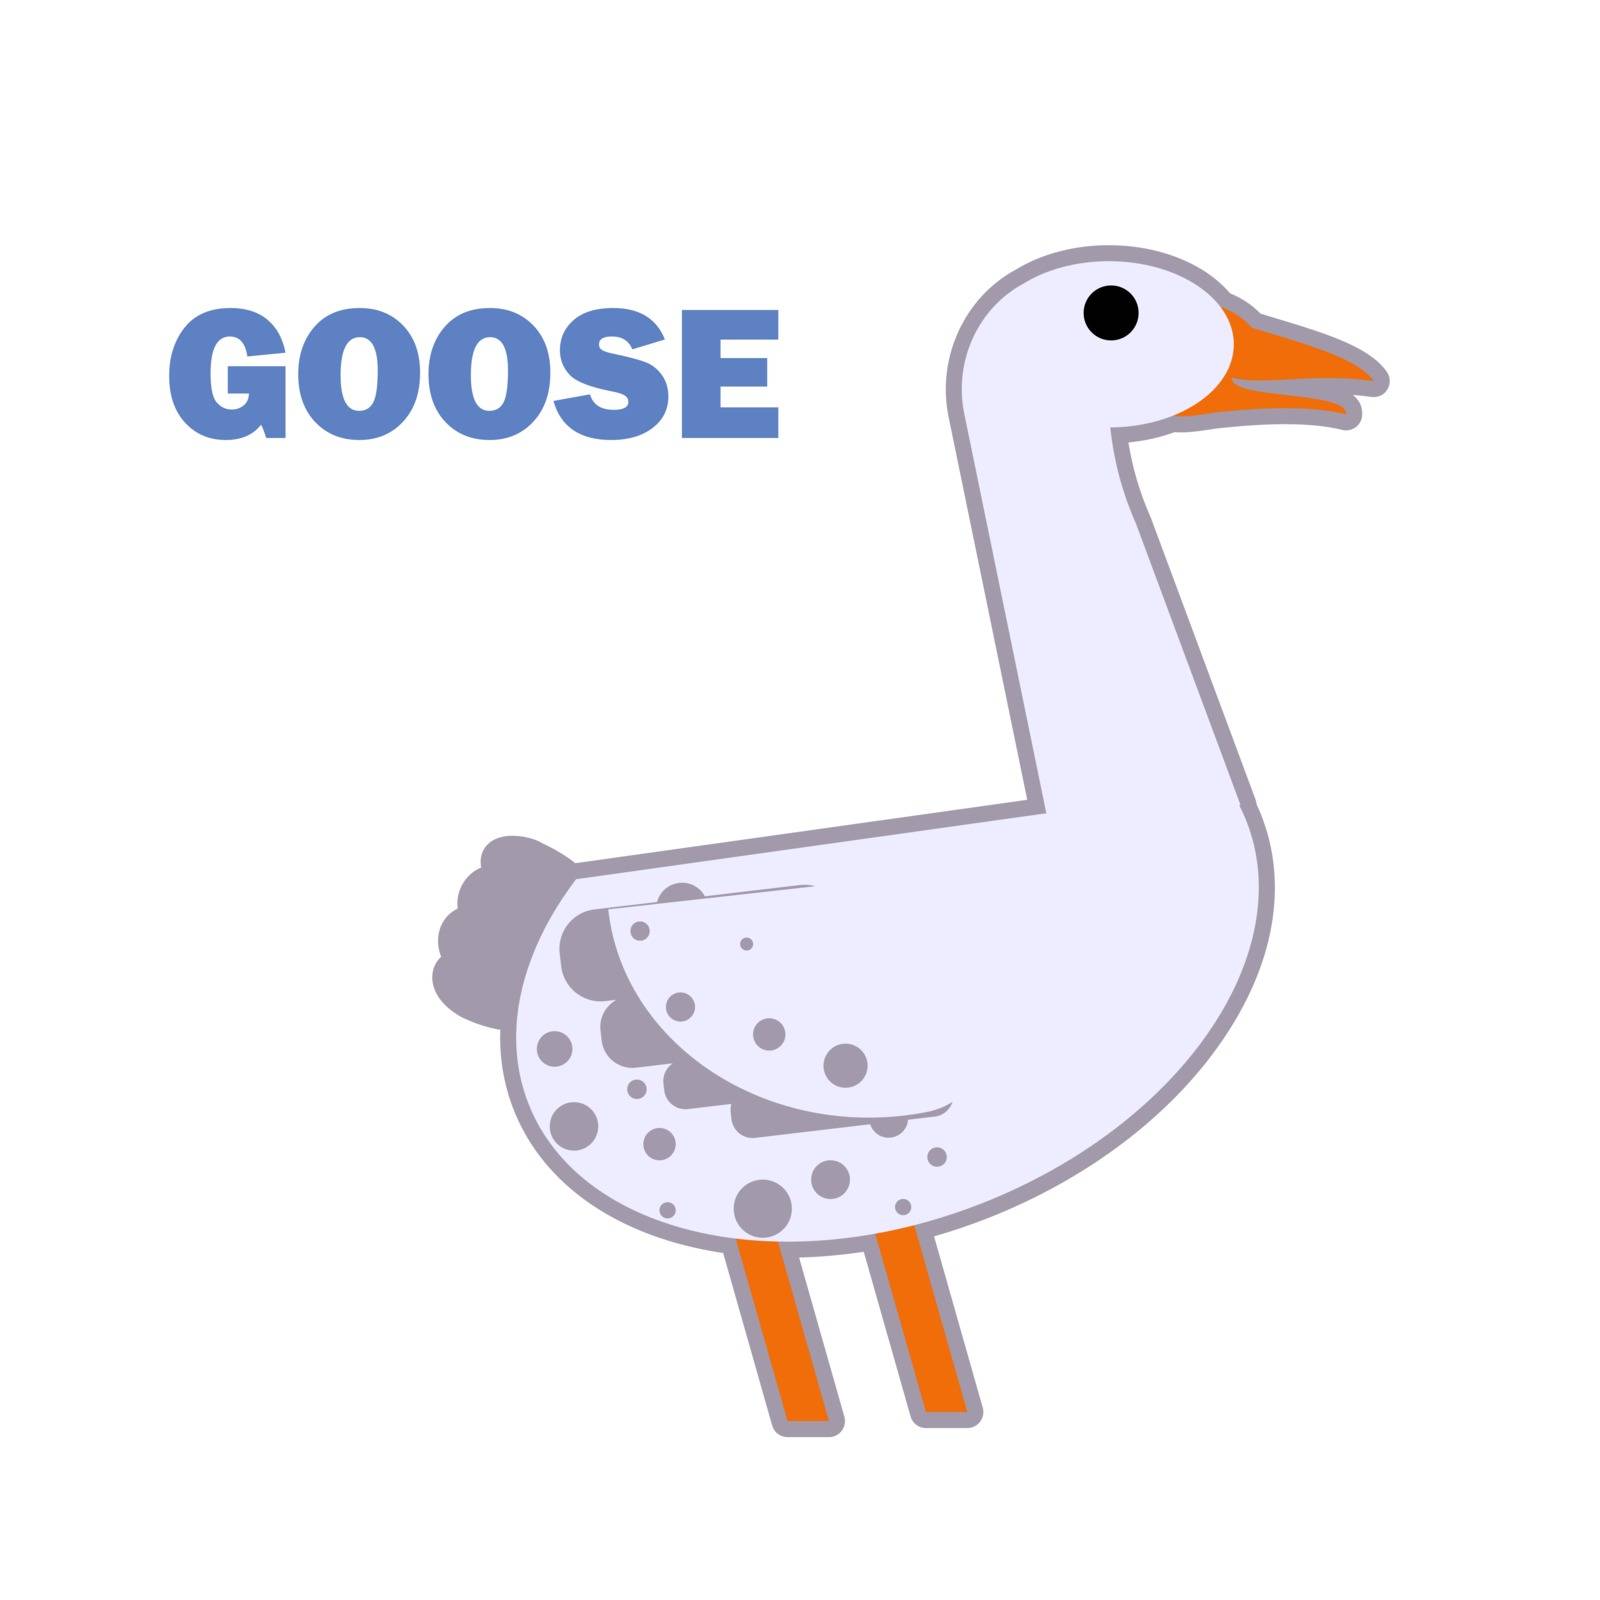 The simple flat Domestic bird goose isolated on white. Educational flashcard for teaching preschool in kindergarten. Colorful flat cartoon style illustration.